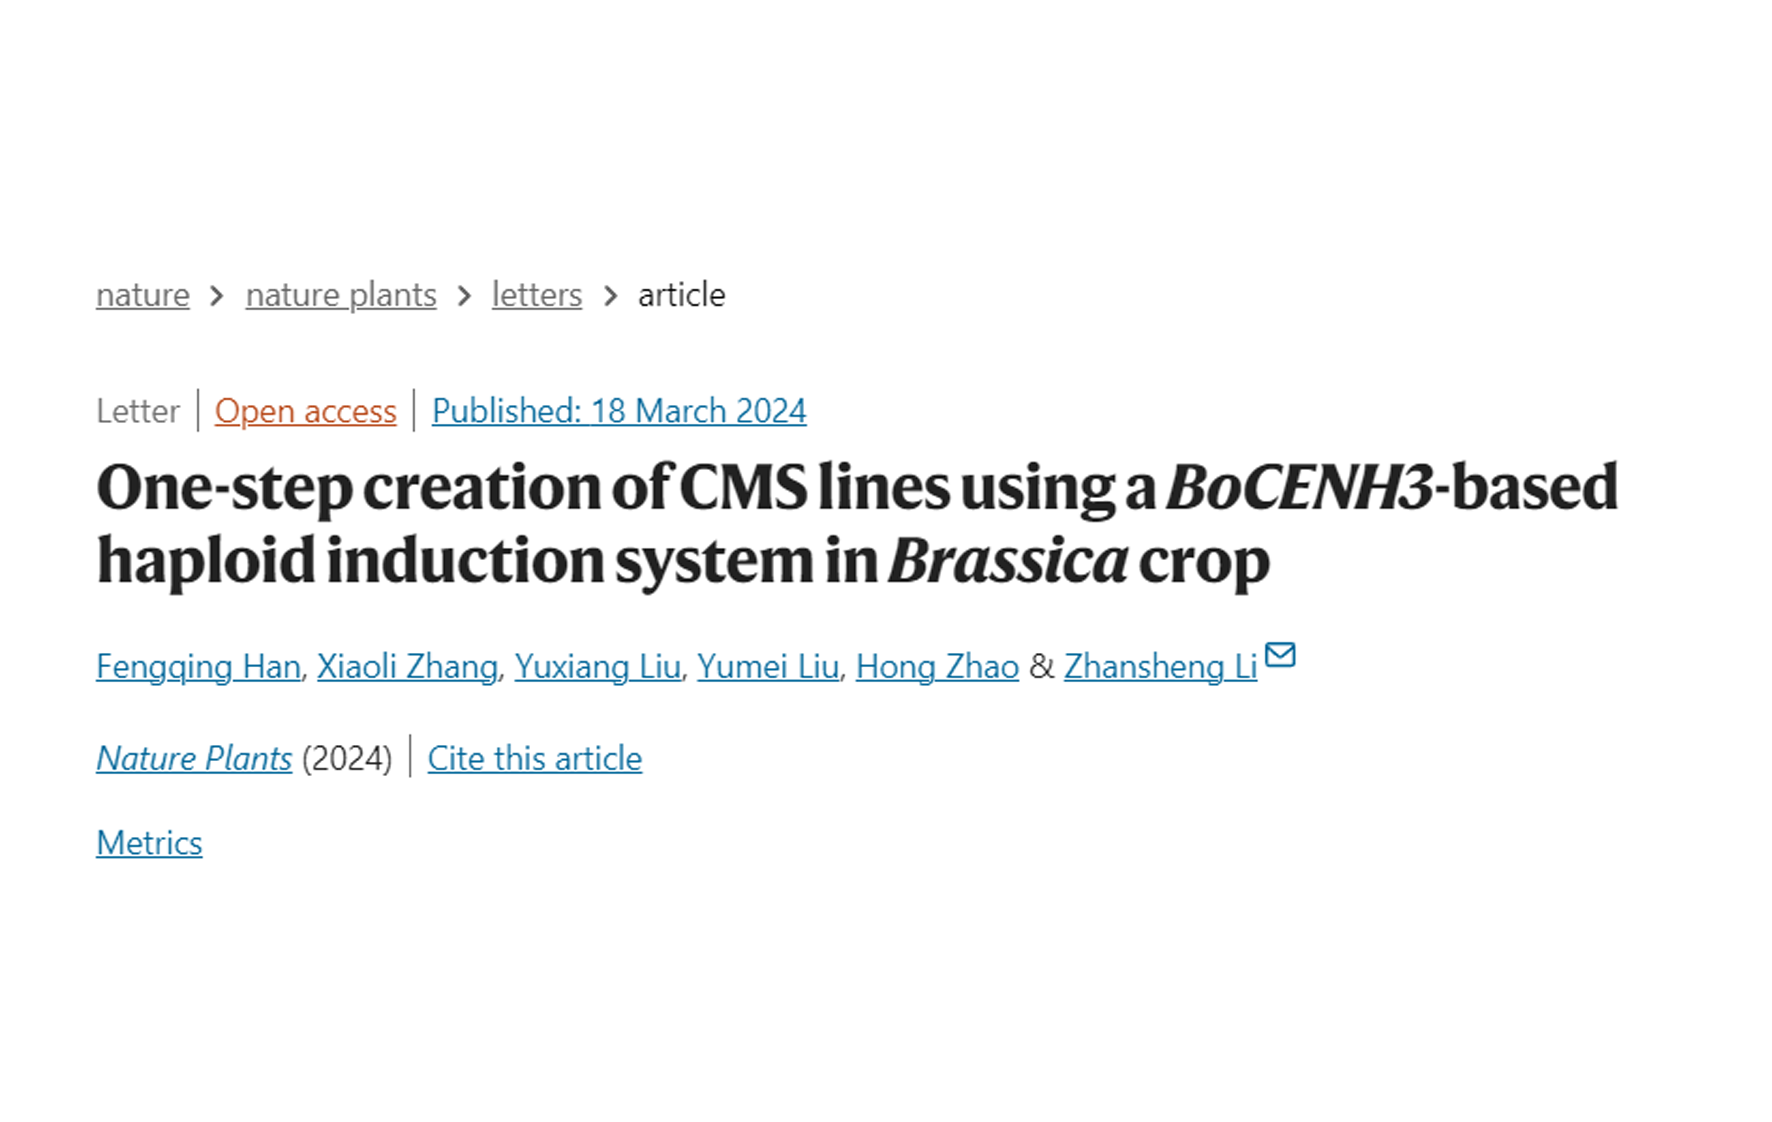 Development of a new method for one-step creation of CMS lines in Brassica crops